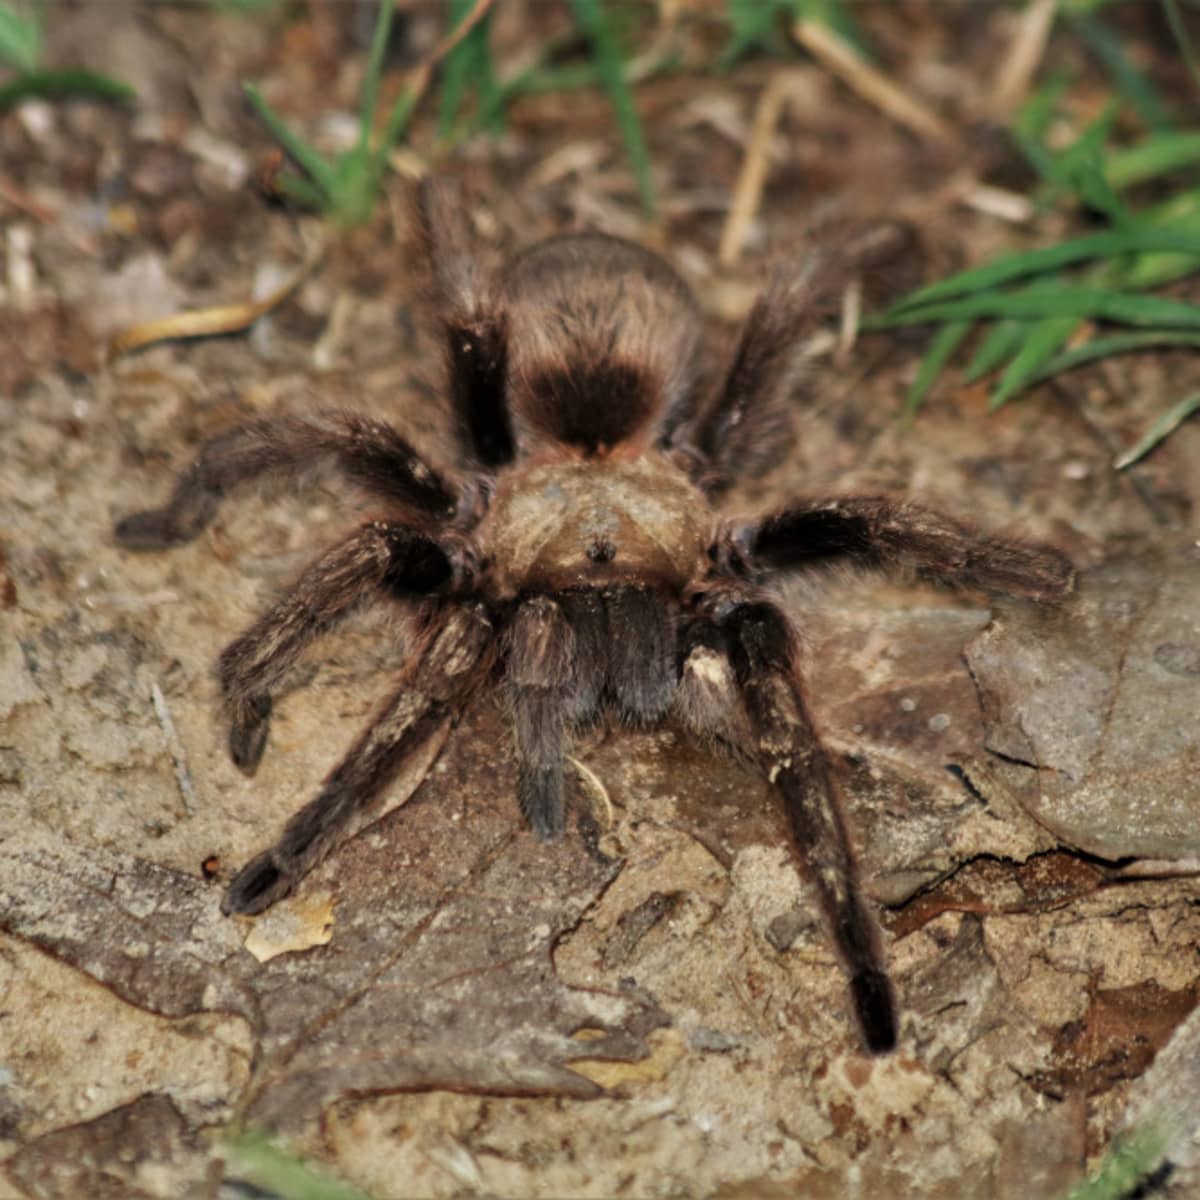 European and Australian spider pictures, information and interestings